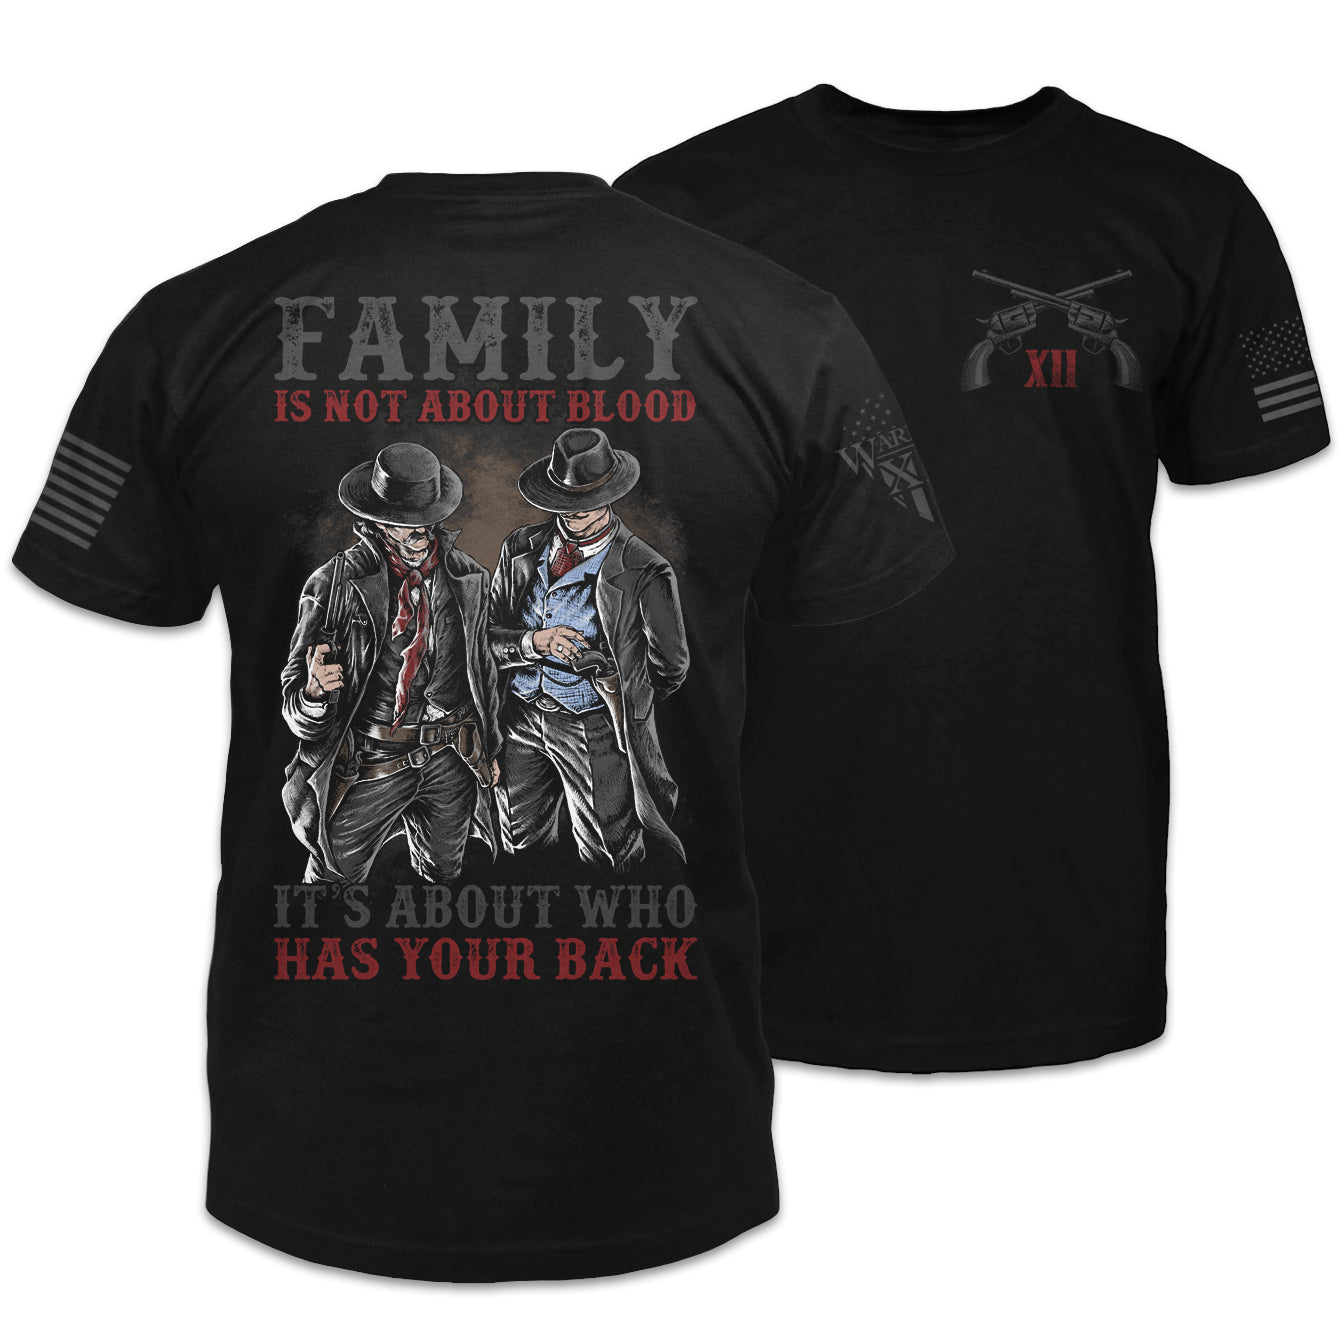 Front & back black t-shirt with the words "Family is not about blood, it's about who has your back" with a two western cowboys printed on the shirt.